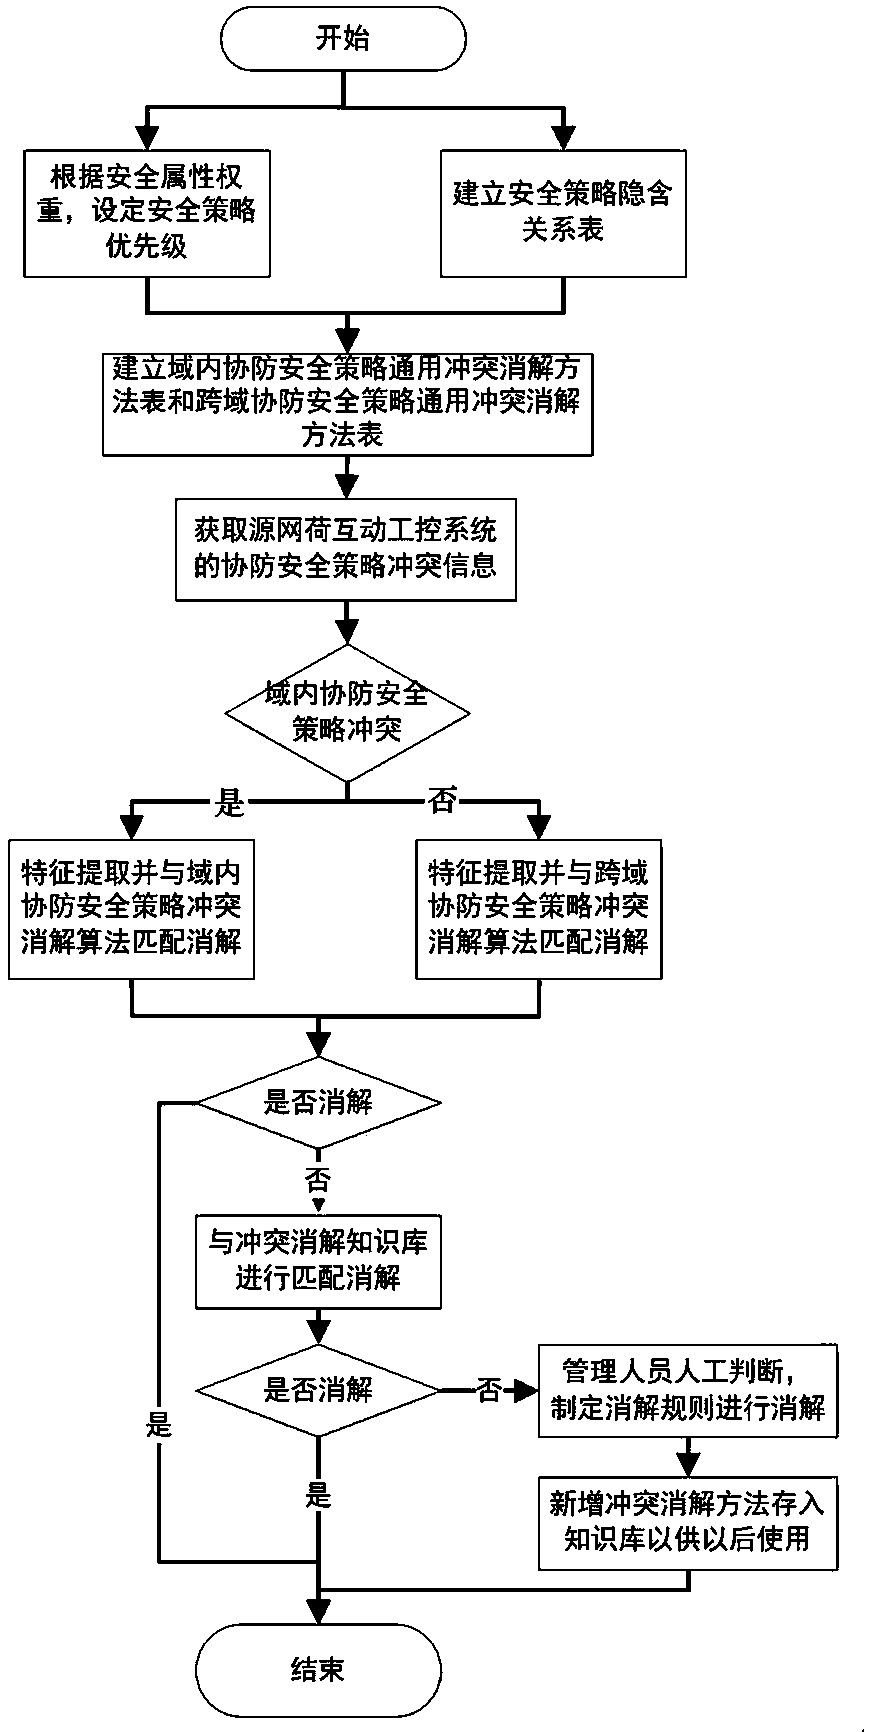 Collaborative defense strategy conflict resolution method and system